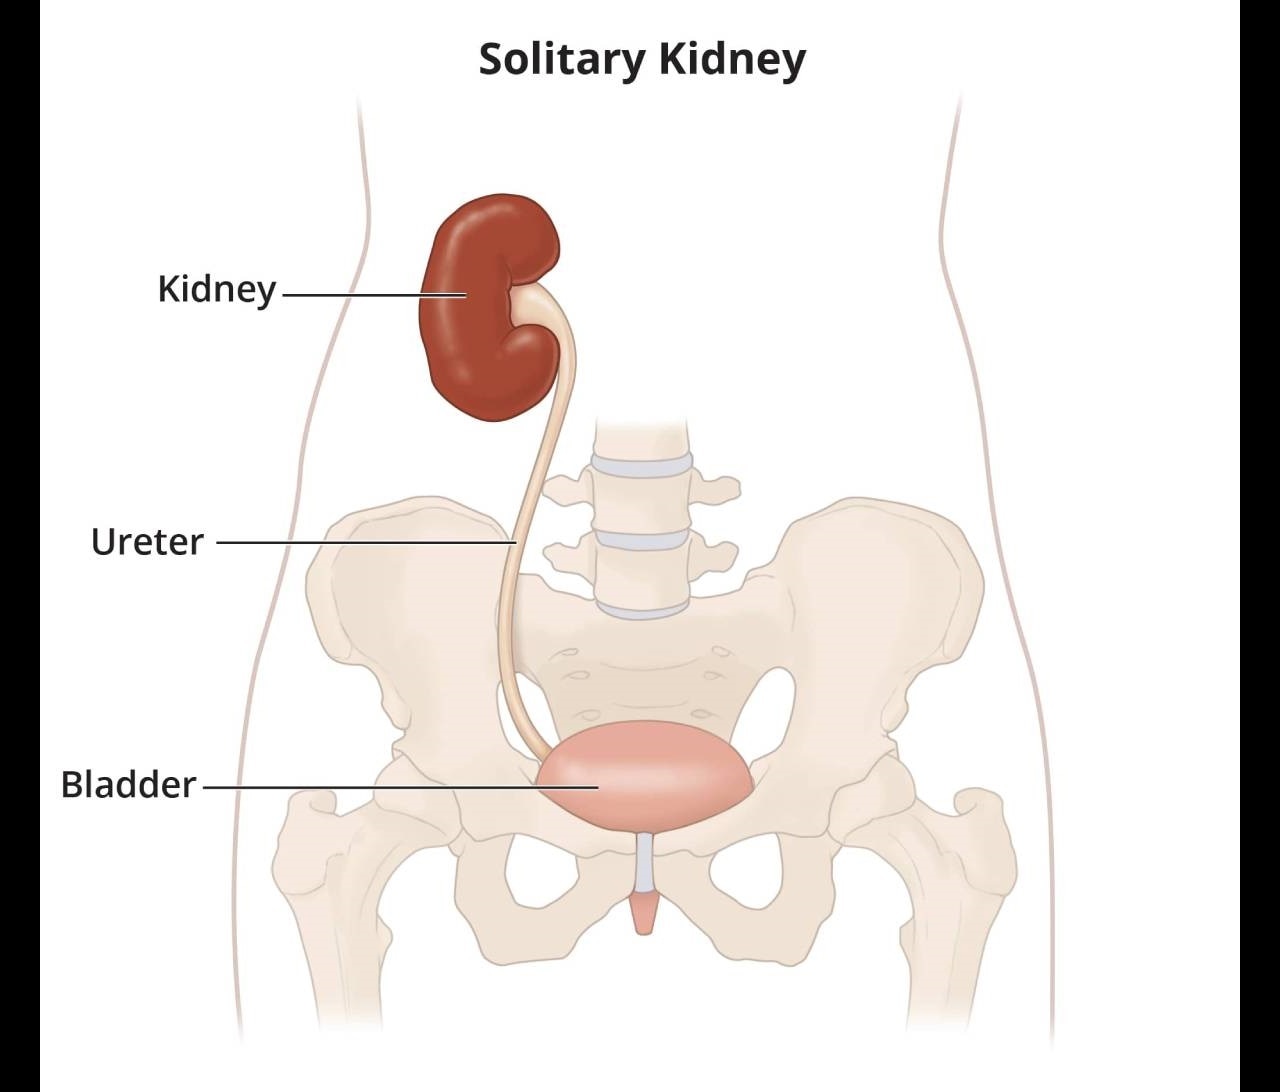 The illustration shows a solitary kidney, one ureter, and the bladder.